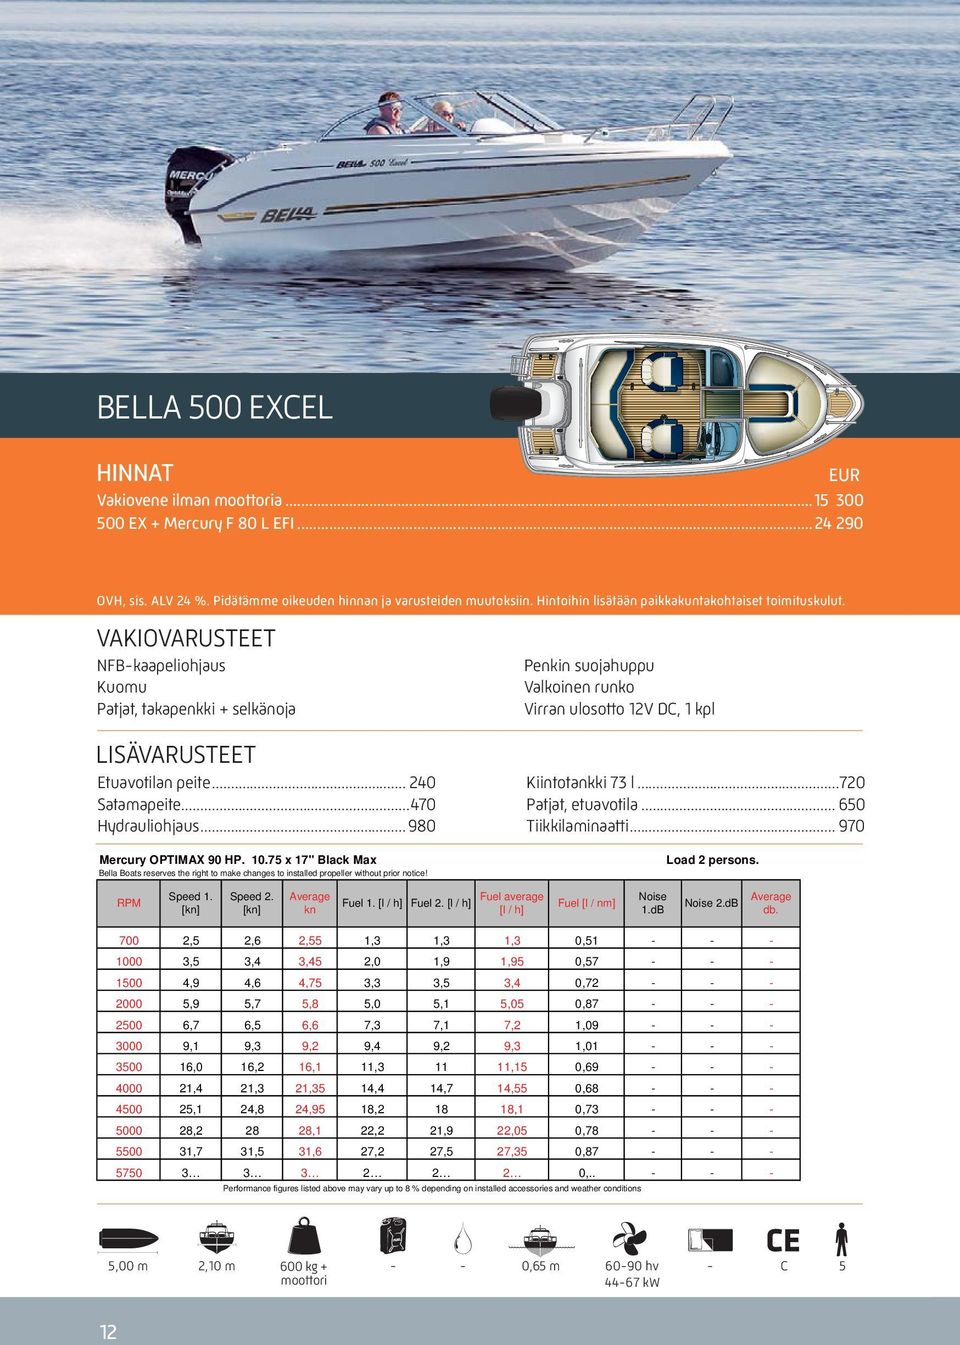 Bella Boats reserves the right to make changes to installed propeller without prior notice! RPM Speed 1. [kn] Speed 2. [kn] Average kn Fuel 1. [l / h] Fuel 2.